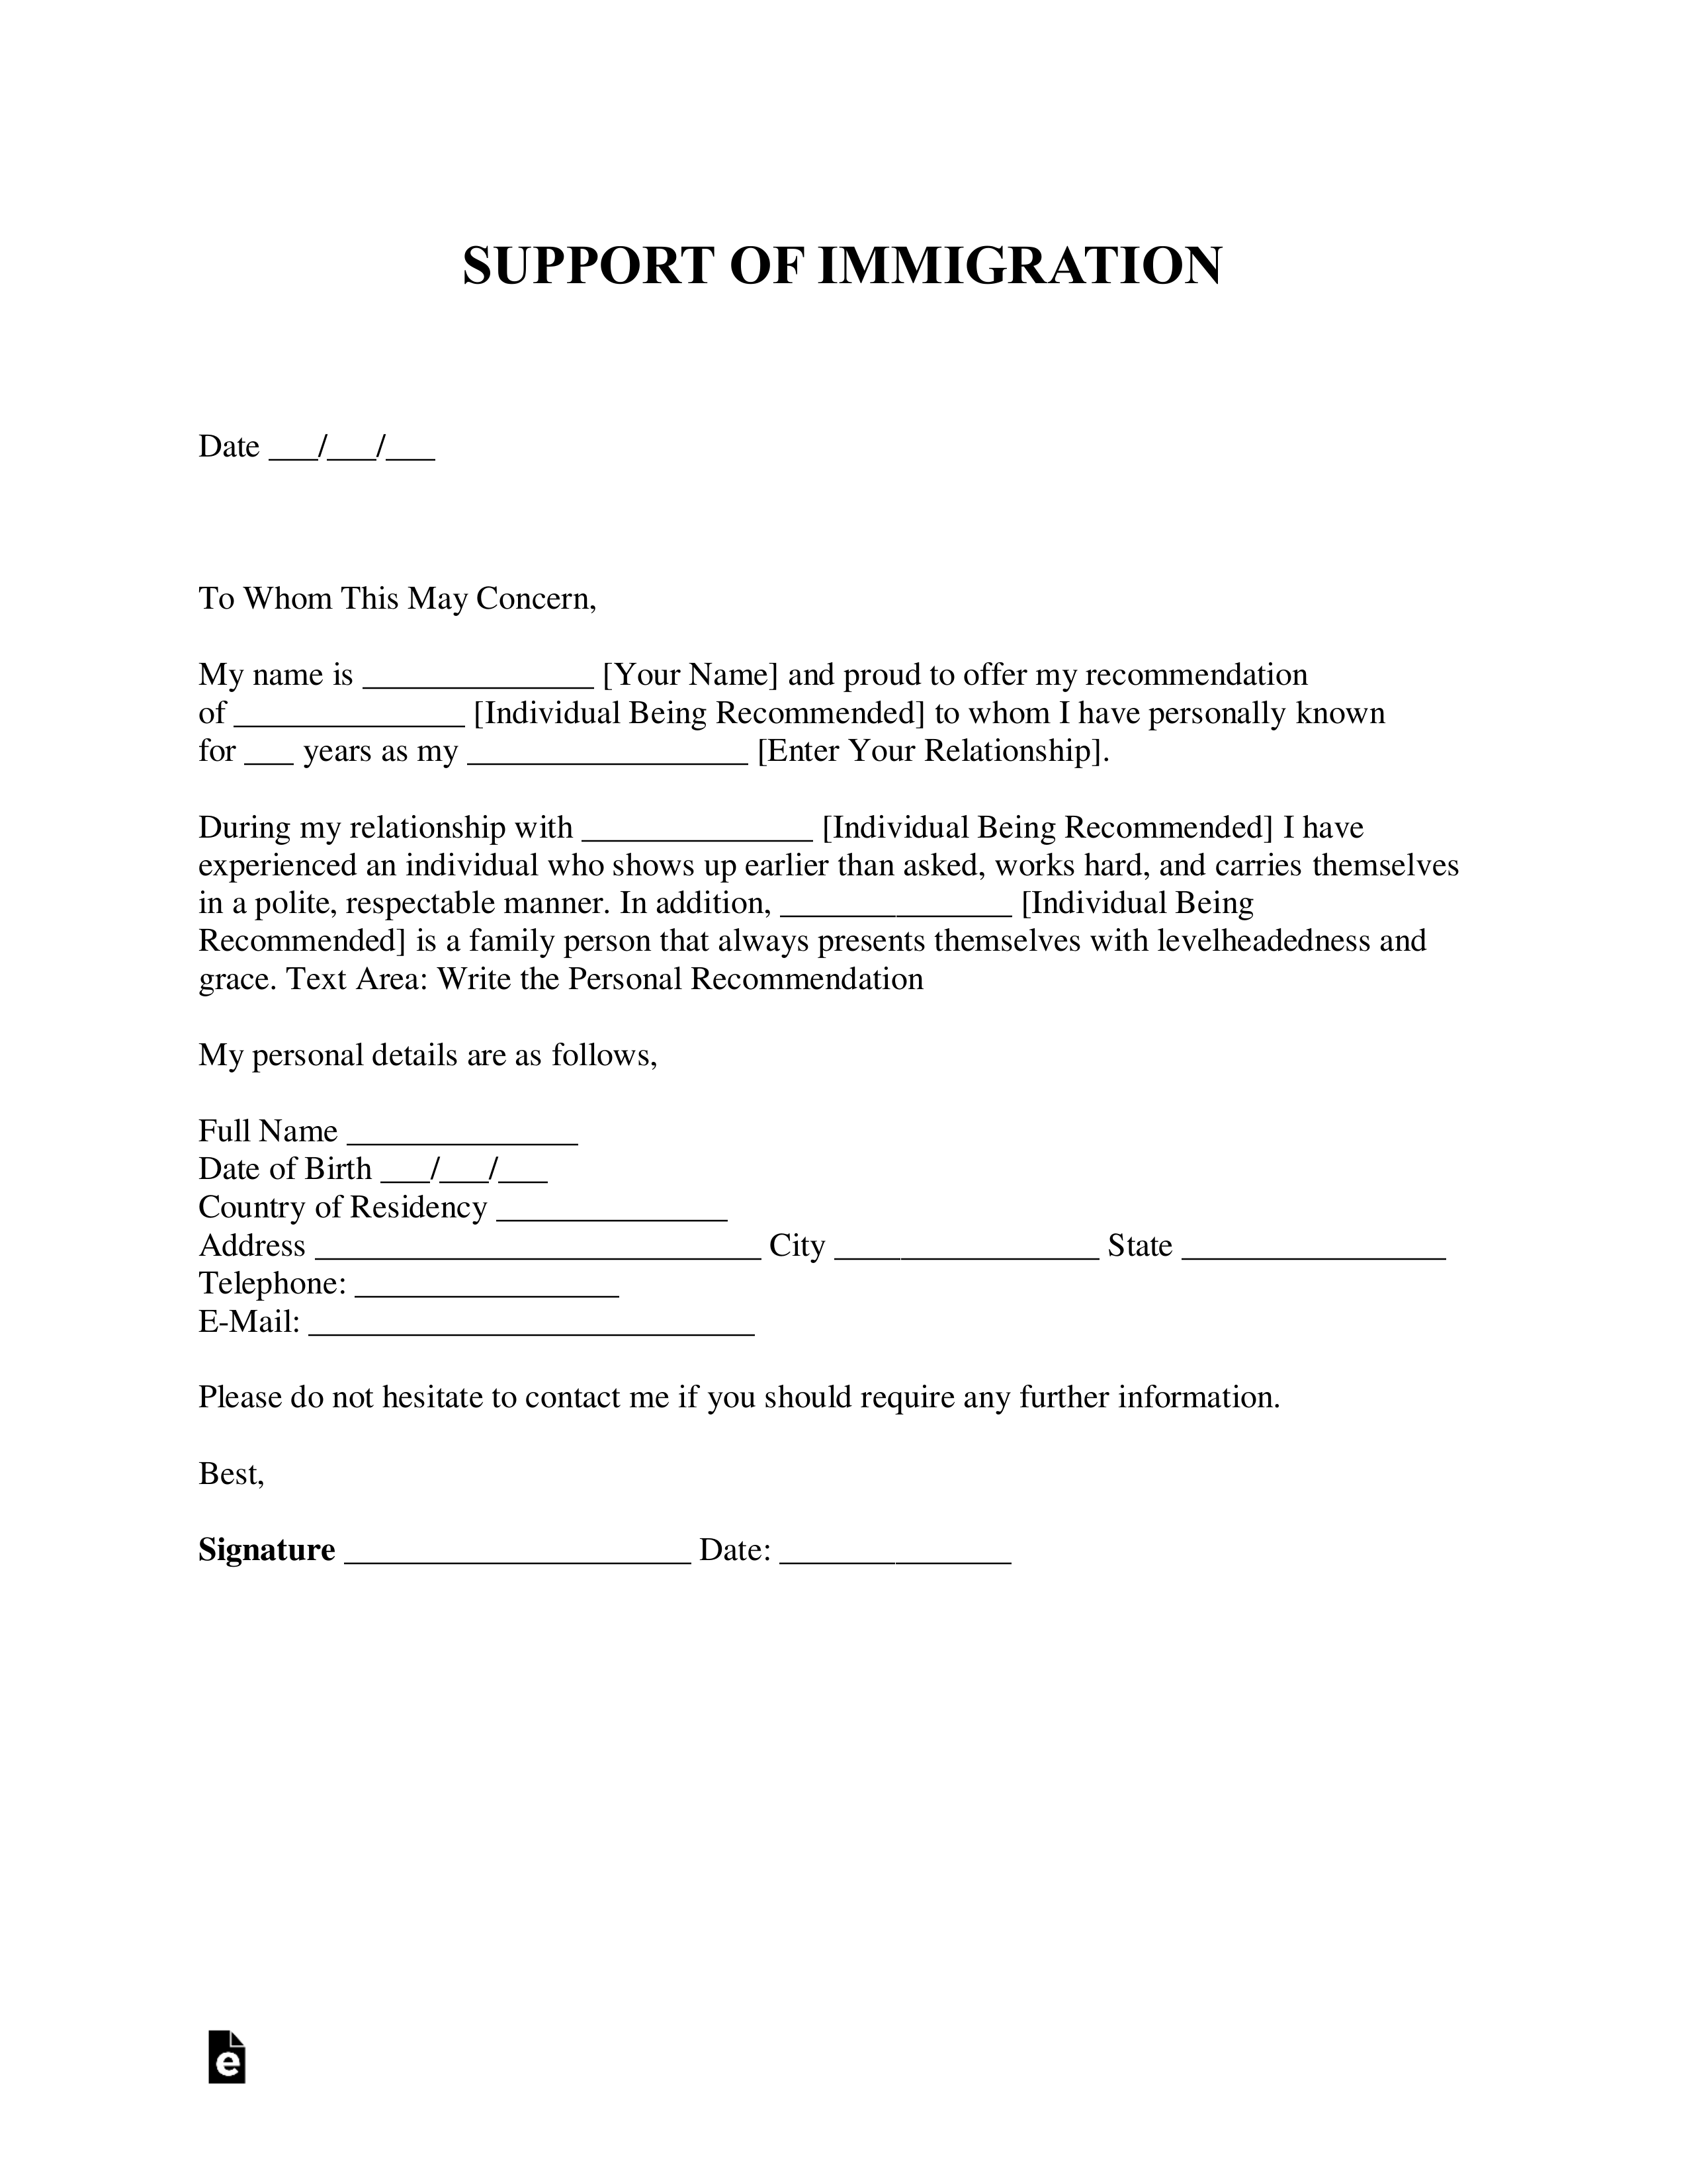 Sample Immigration Reference Letter For A Friend from eforms.com